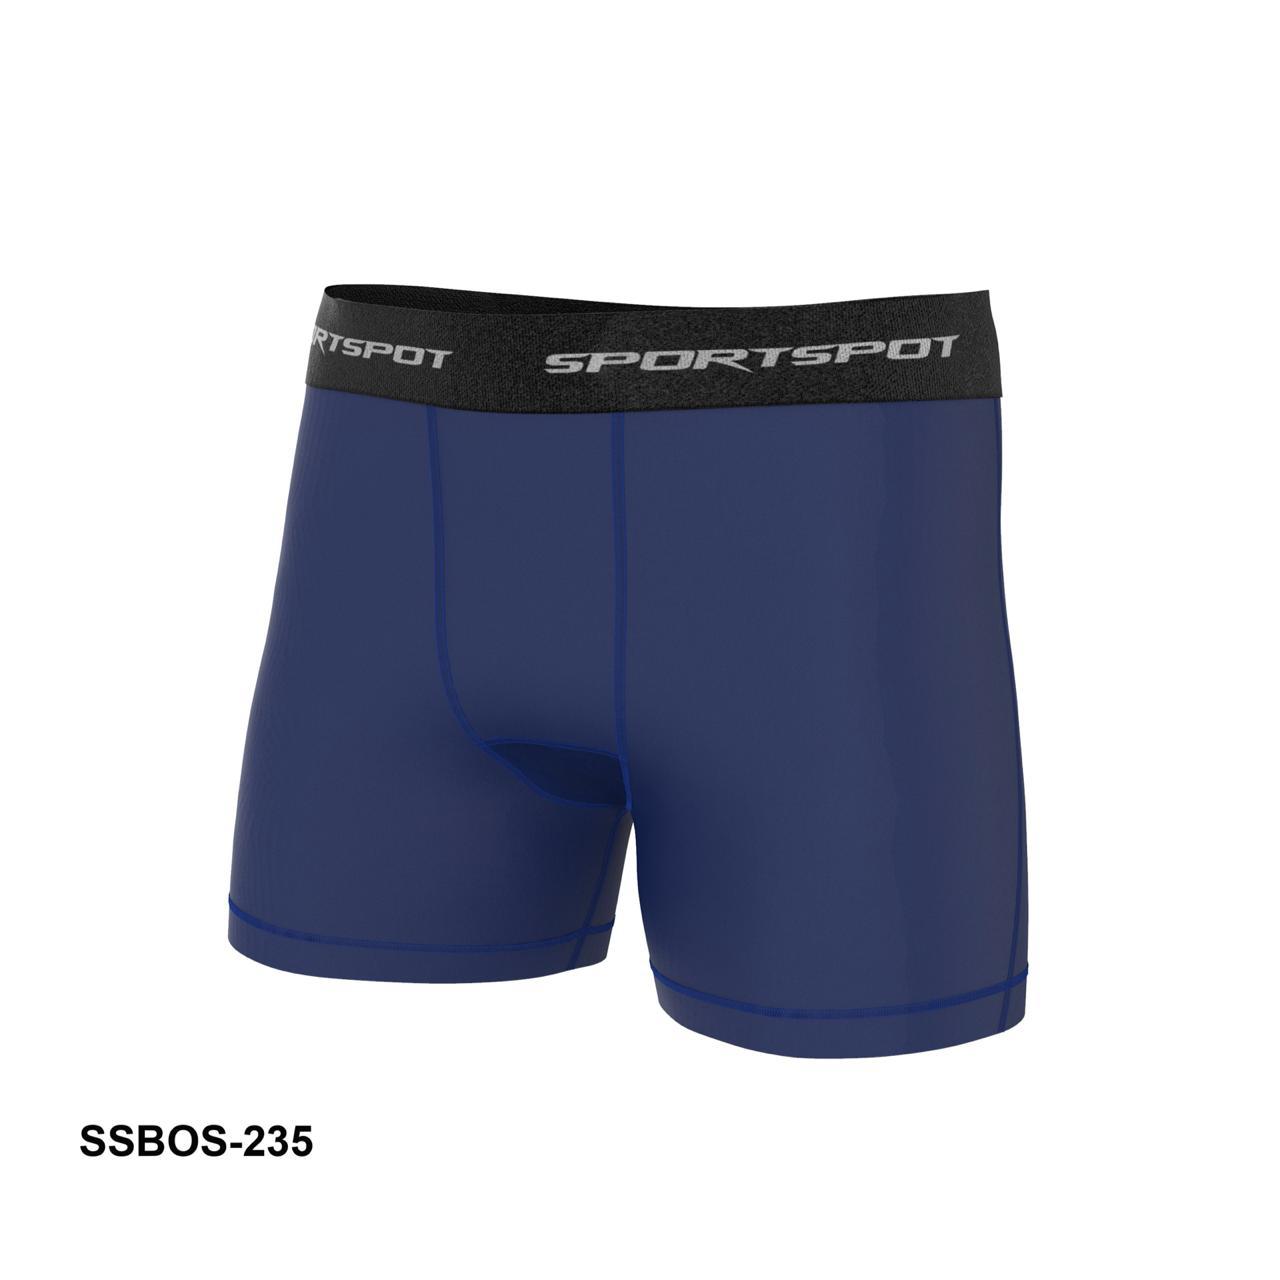 blue bicycling underwear boxers  